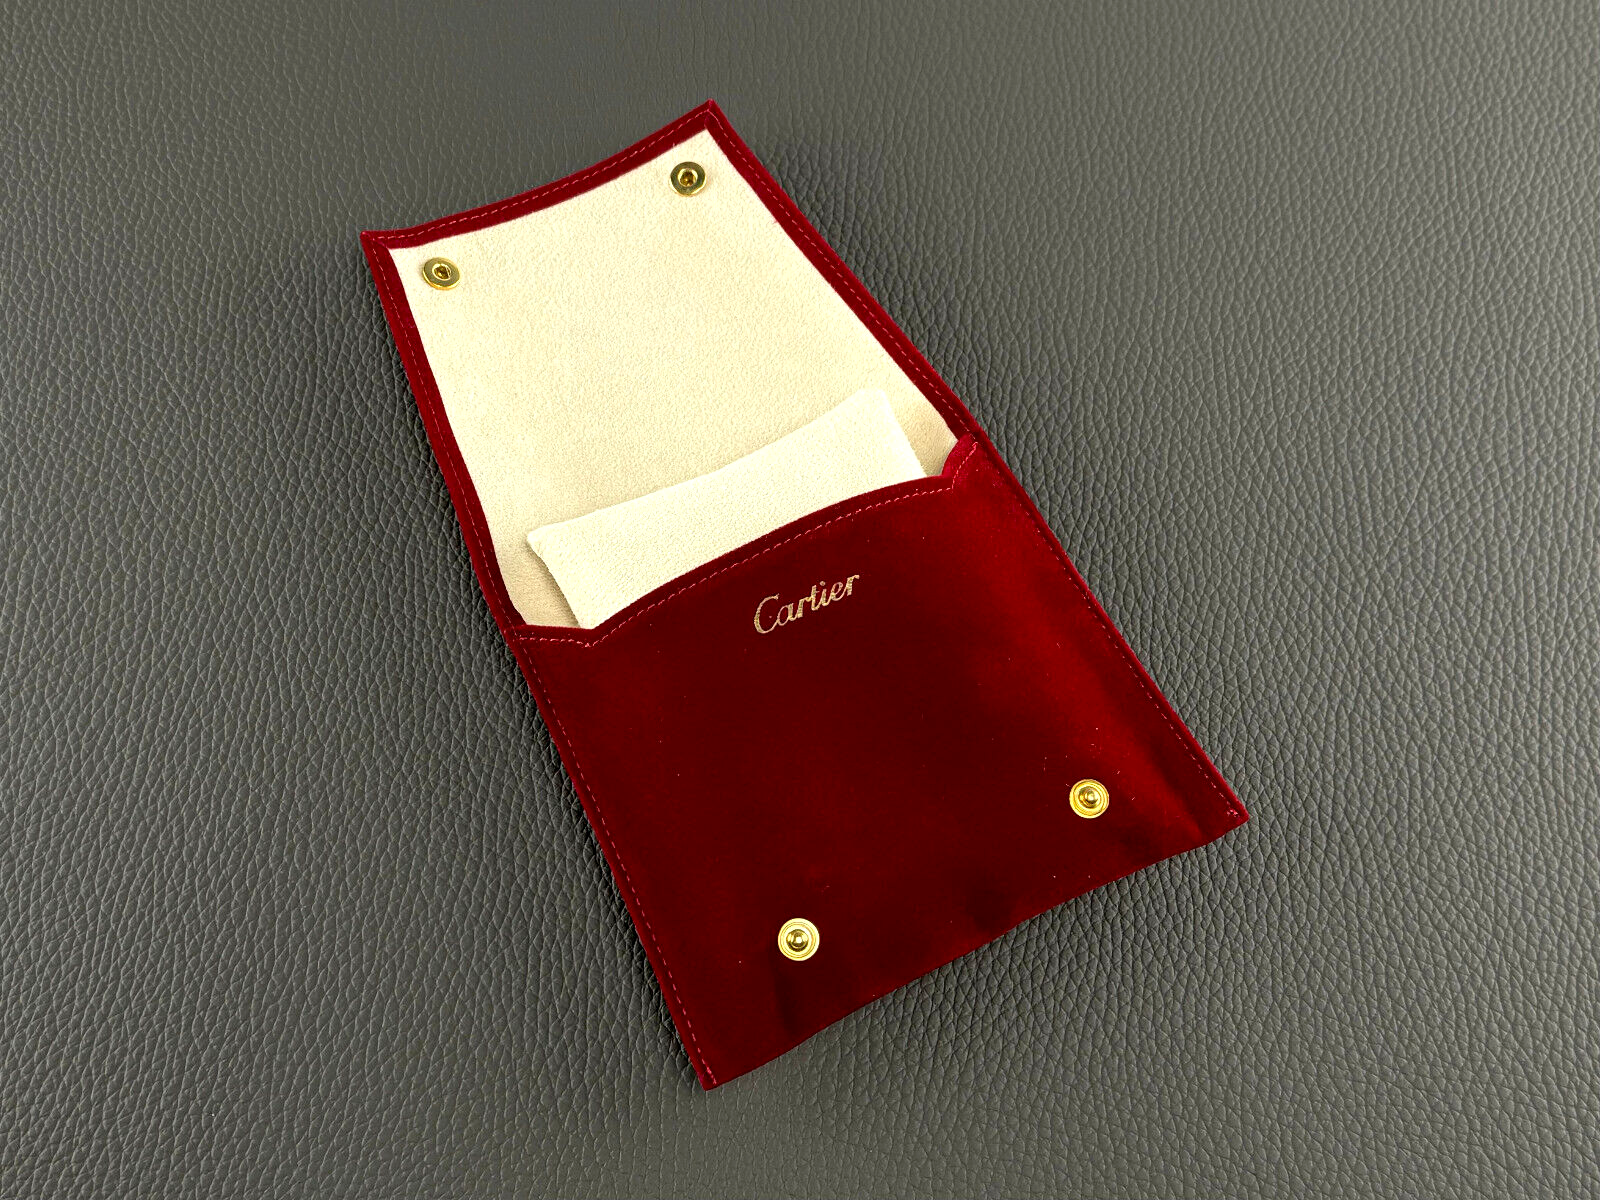 Cartier fabric watch case red